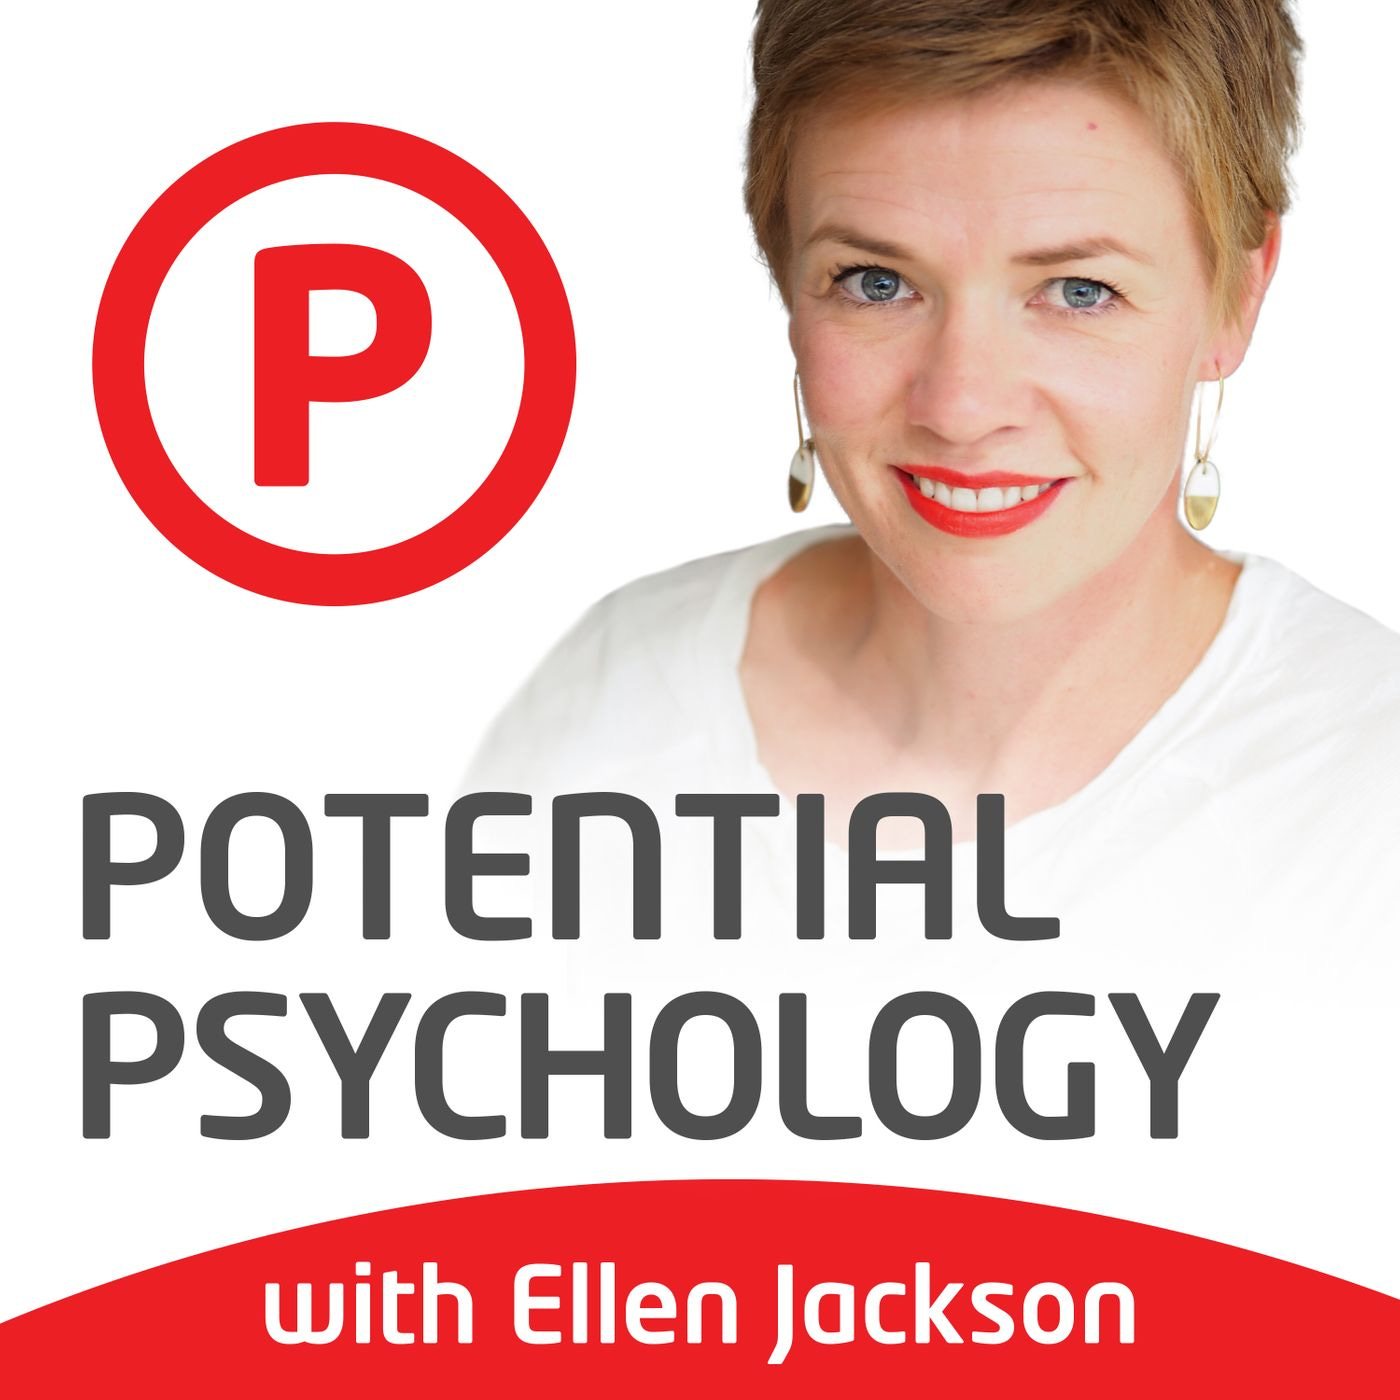 A quick catch up: The latest news from Potential Psychology HQ